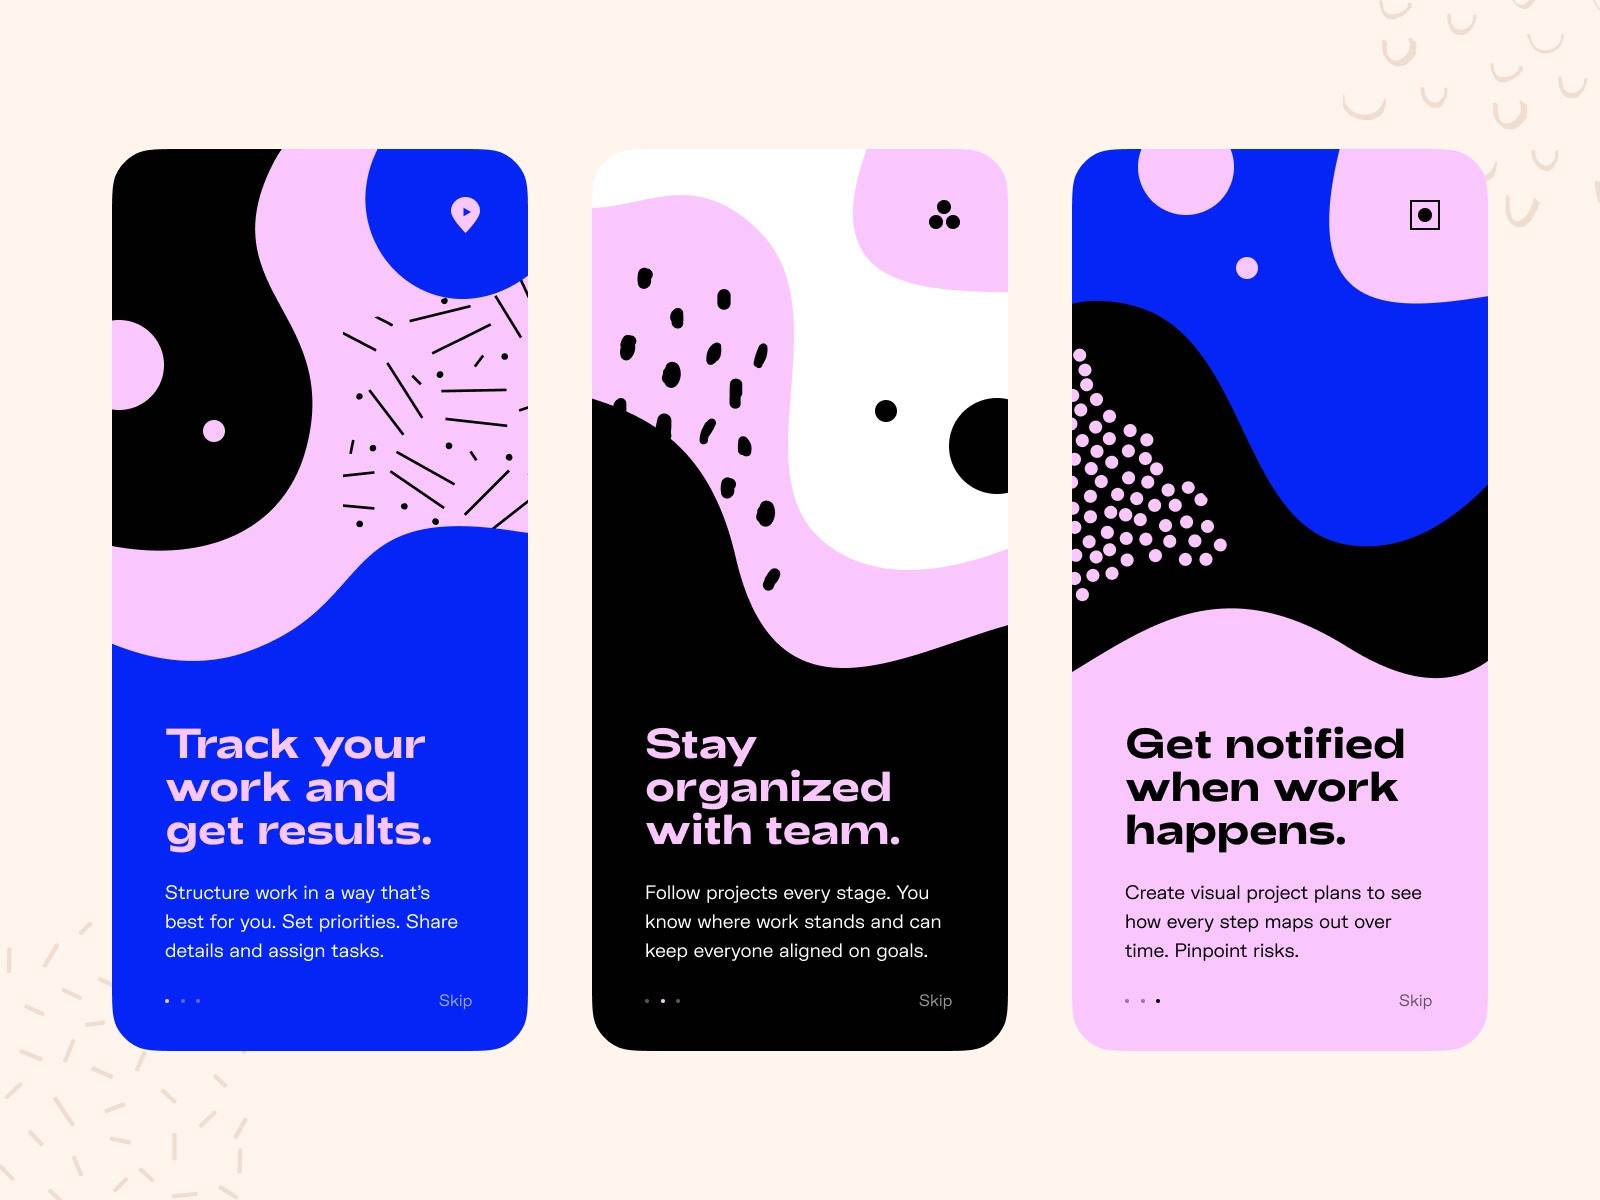 Bright colors and bold fonts are essential for an easy-to-grasp onboarding